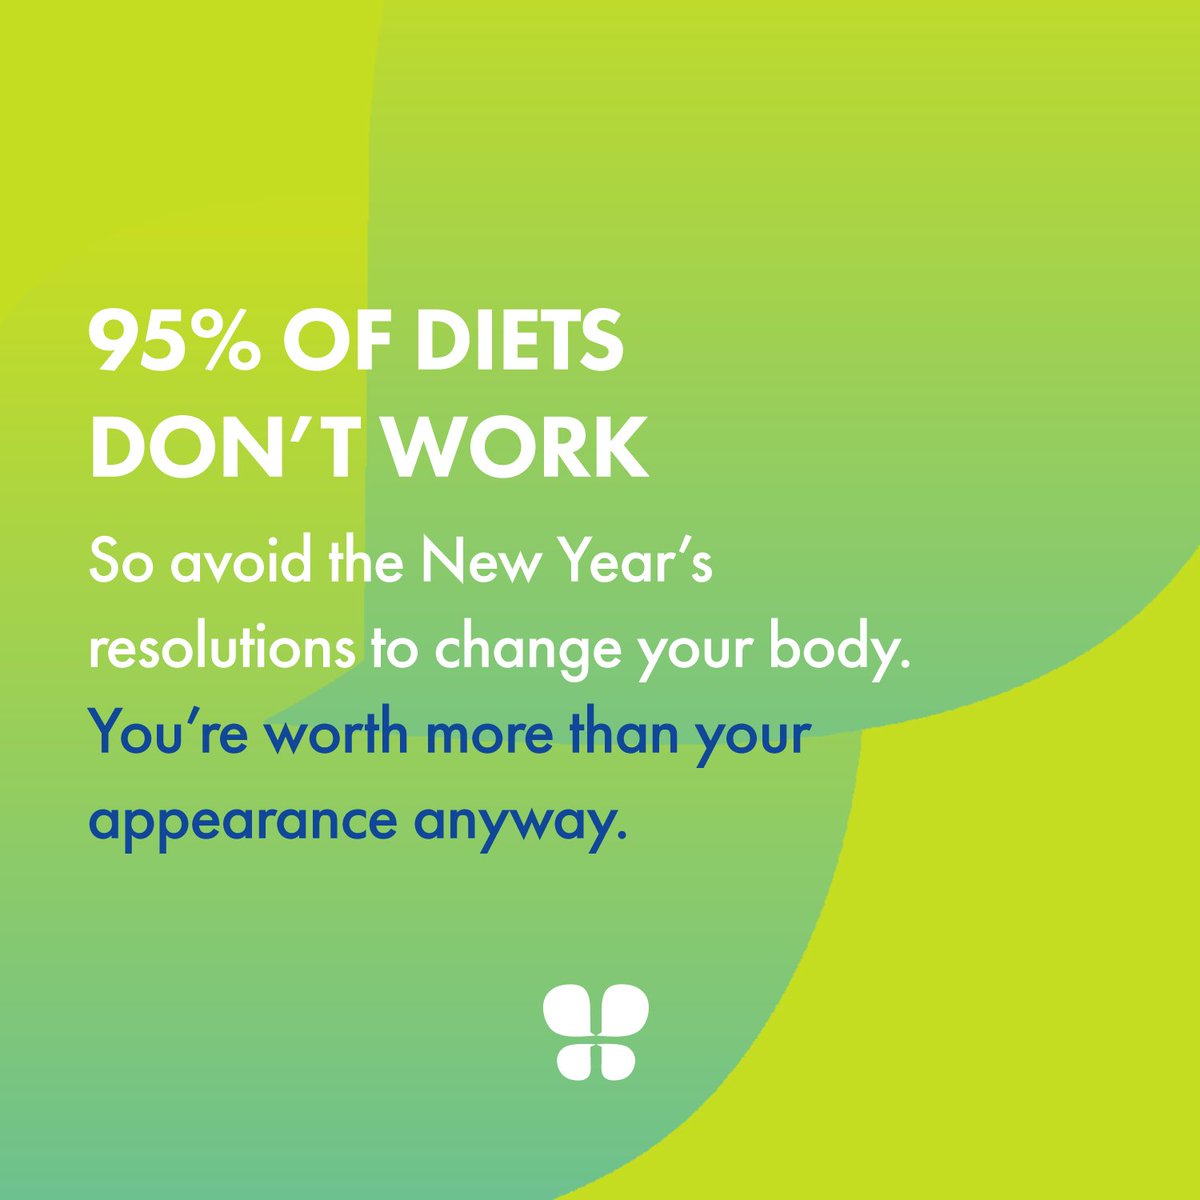 This time of year is particularly rife with #dietculture messaging that says you need to change your body in order to be accepted, marketing that makes you feel guilty for not exercising or eating certain foods, & content that encourages a 'new year, new me' mentality. Remember⬇️